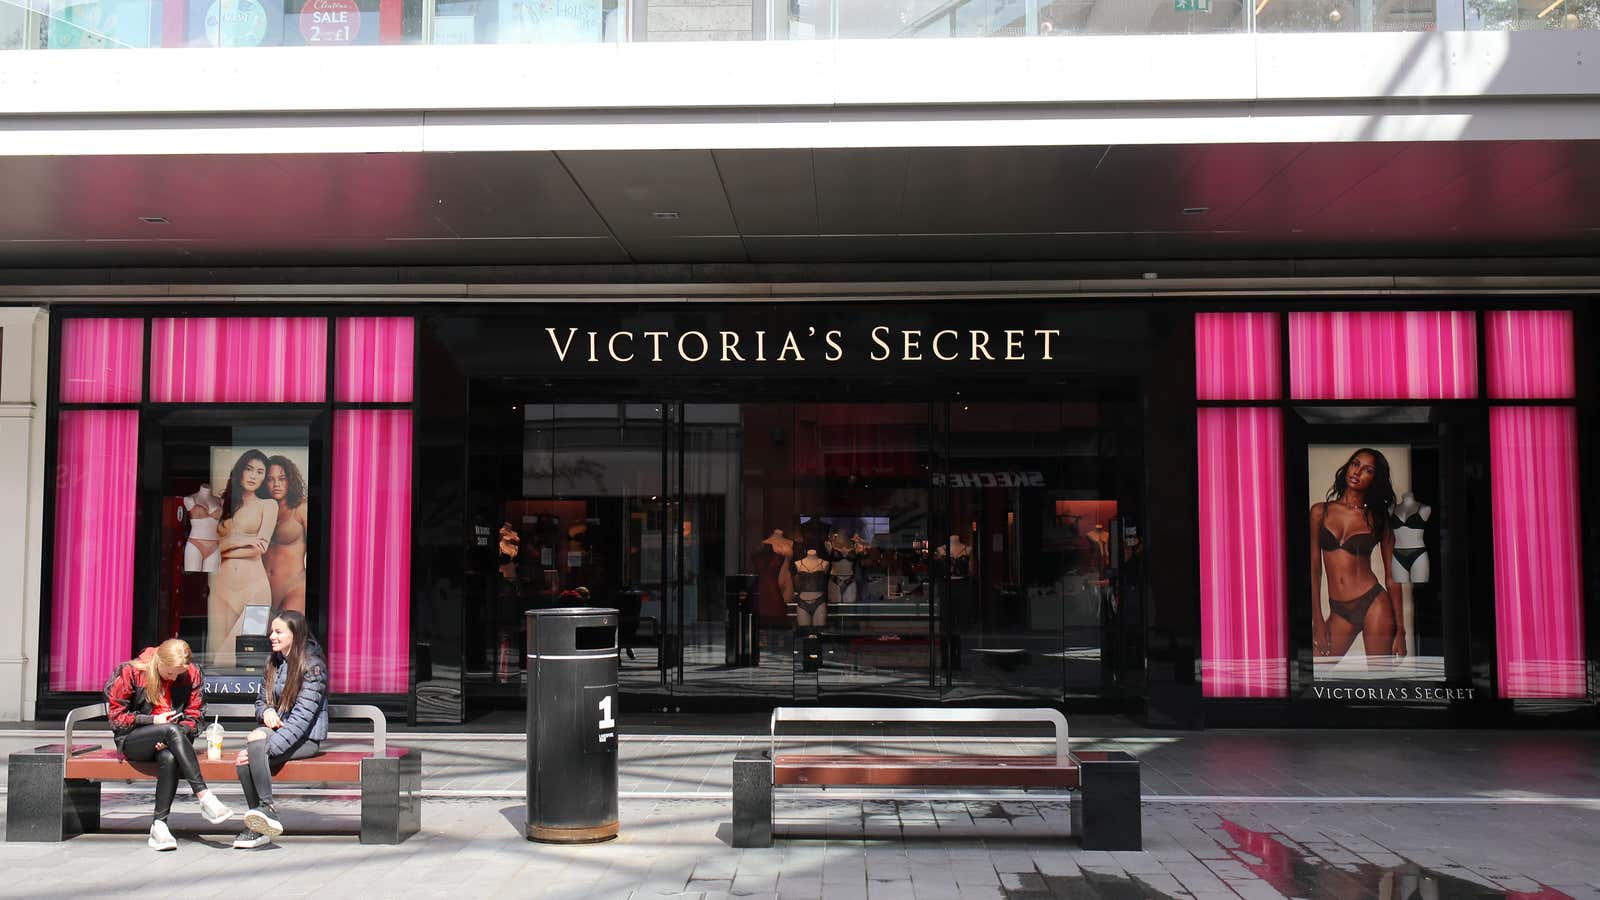 Victoria's Secret has hired its first male model